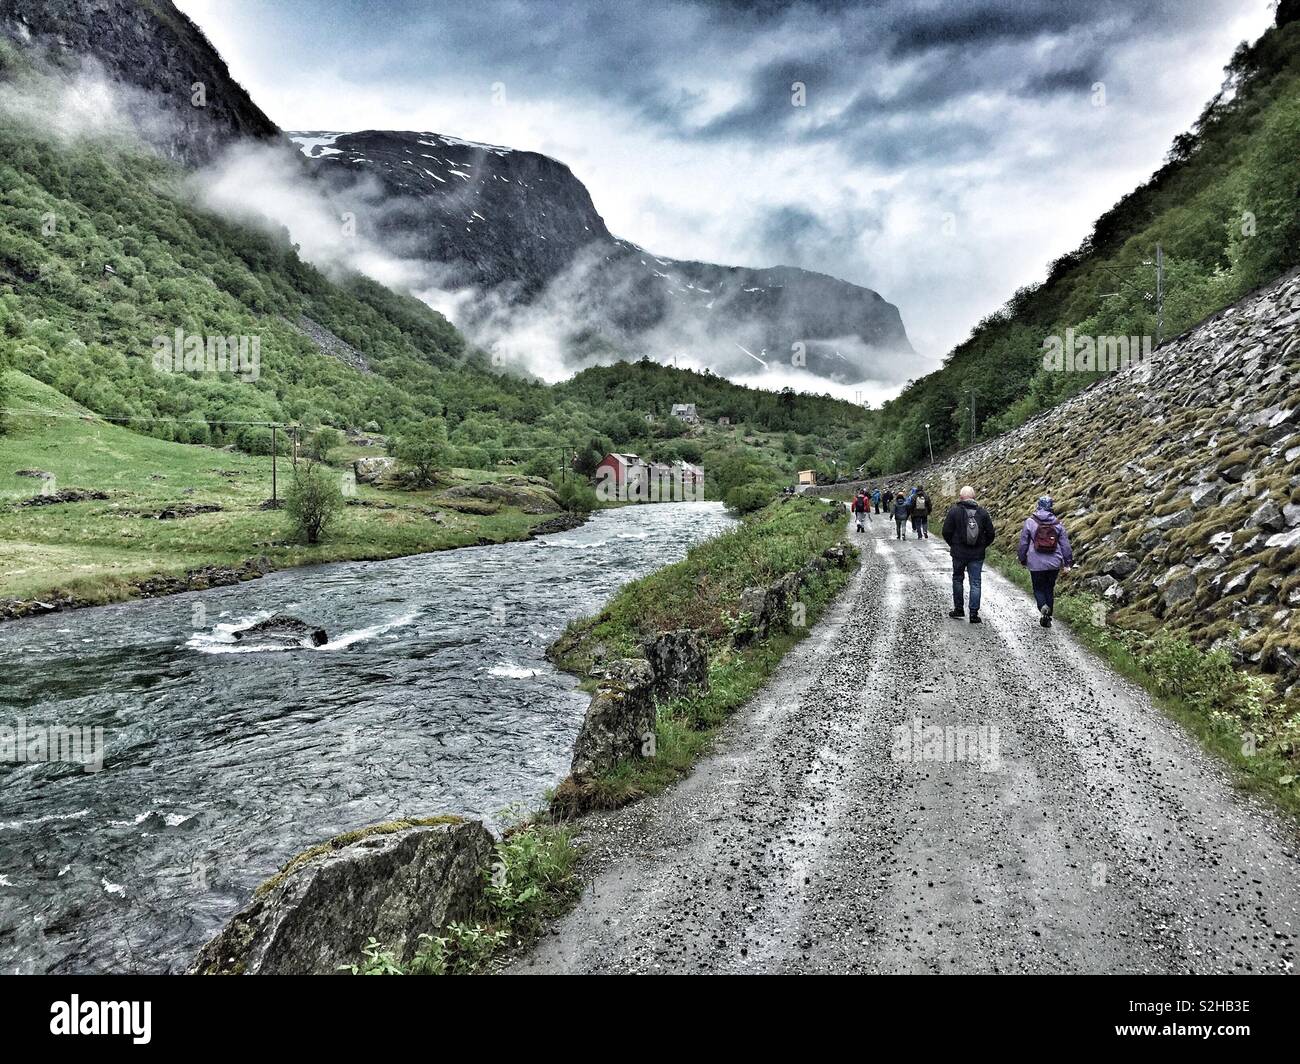 Hiking down the Mountain to Catch the Flam Railway Train back to Flam Village, Norway. Said to be the most beautiful Railway Journey in the world. Spectacular Mountains, Fjords, Glaciers and Rivers. Stock Photo